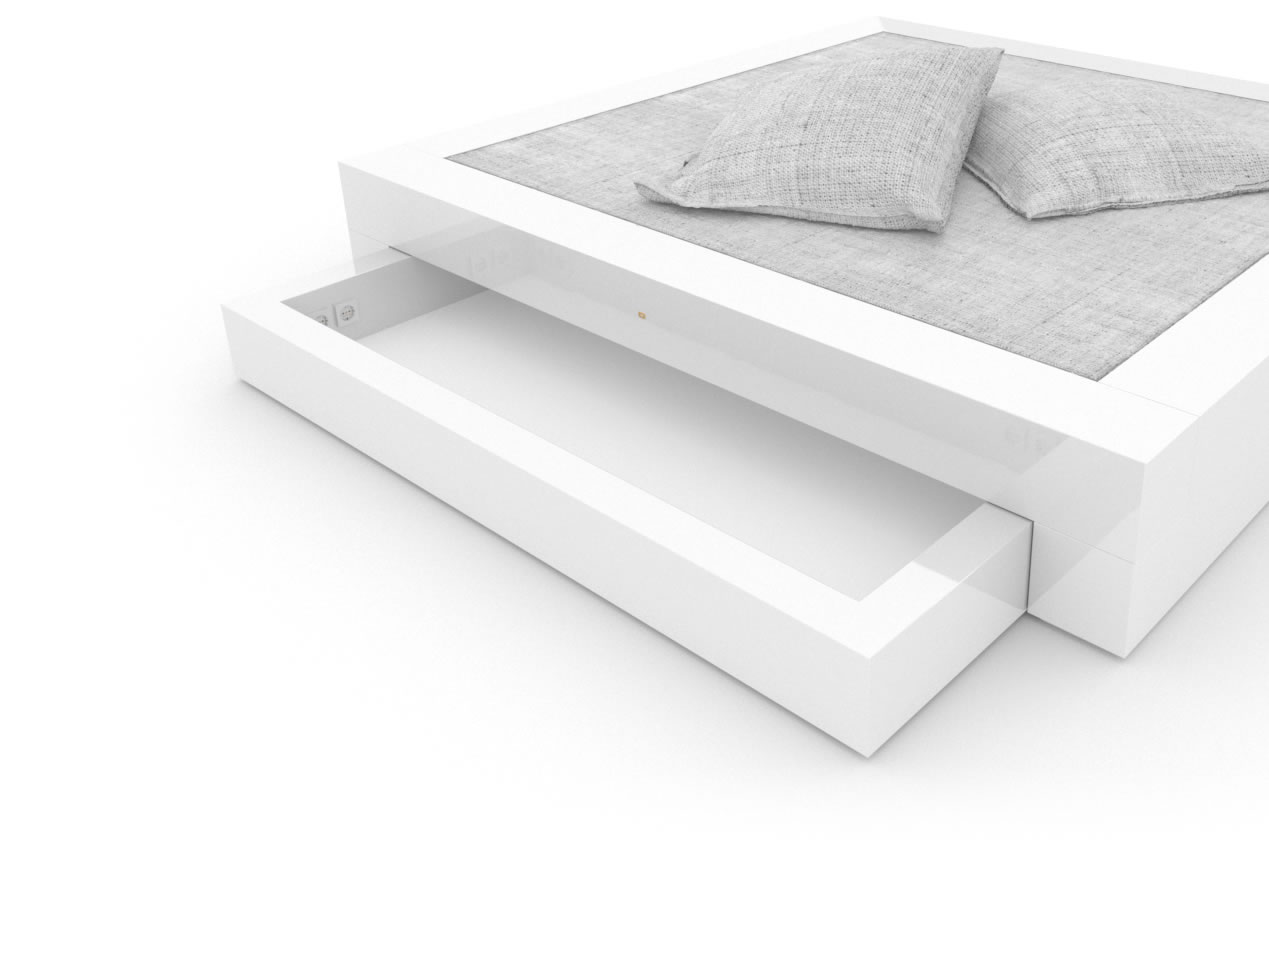 FELIX SCHWAKE BED I I 2 Under Bed Drawers High Gloss White Lacquer Mirror polished Piano Finish Minimalist Bed with Drawers